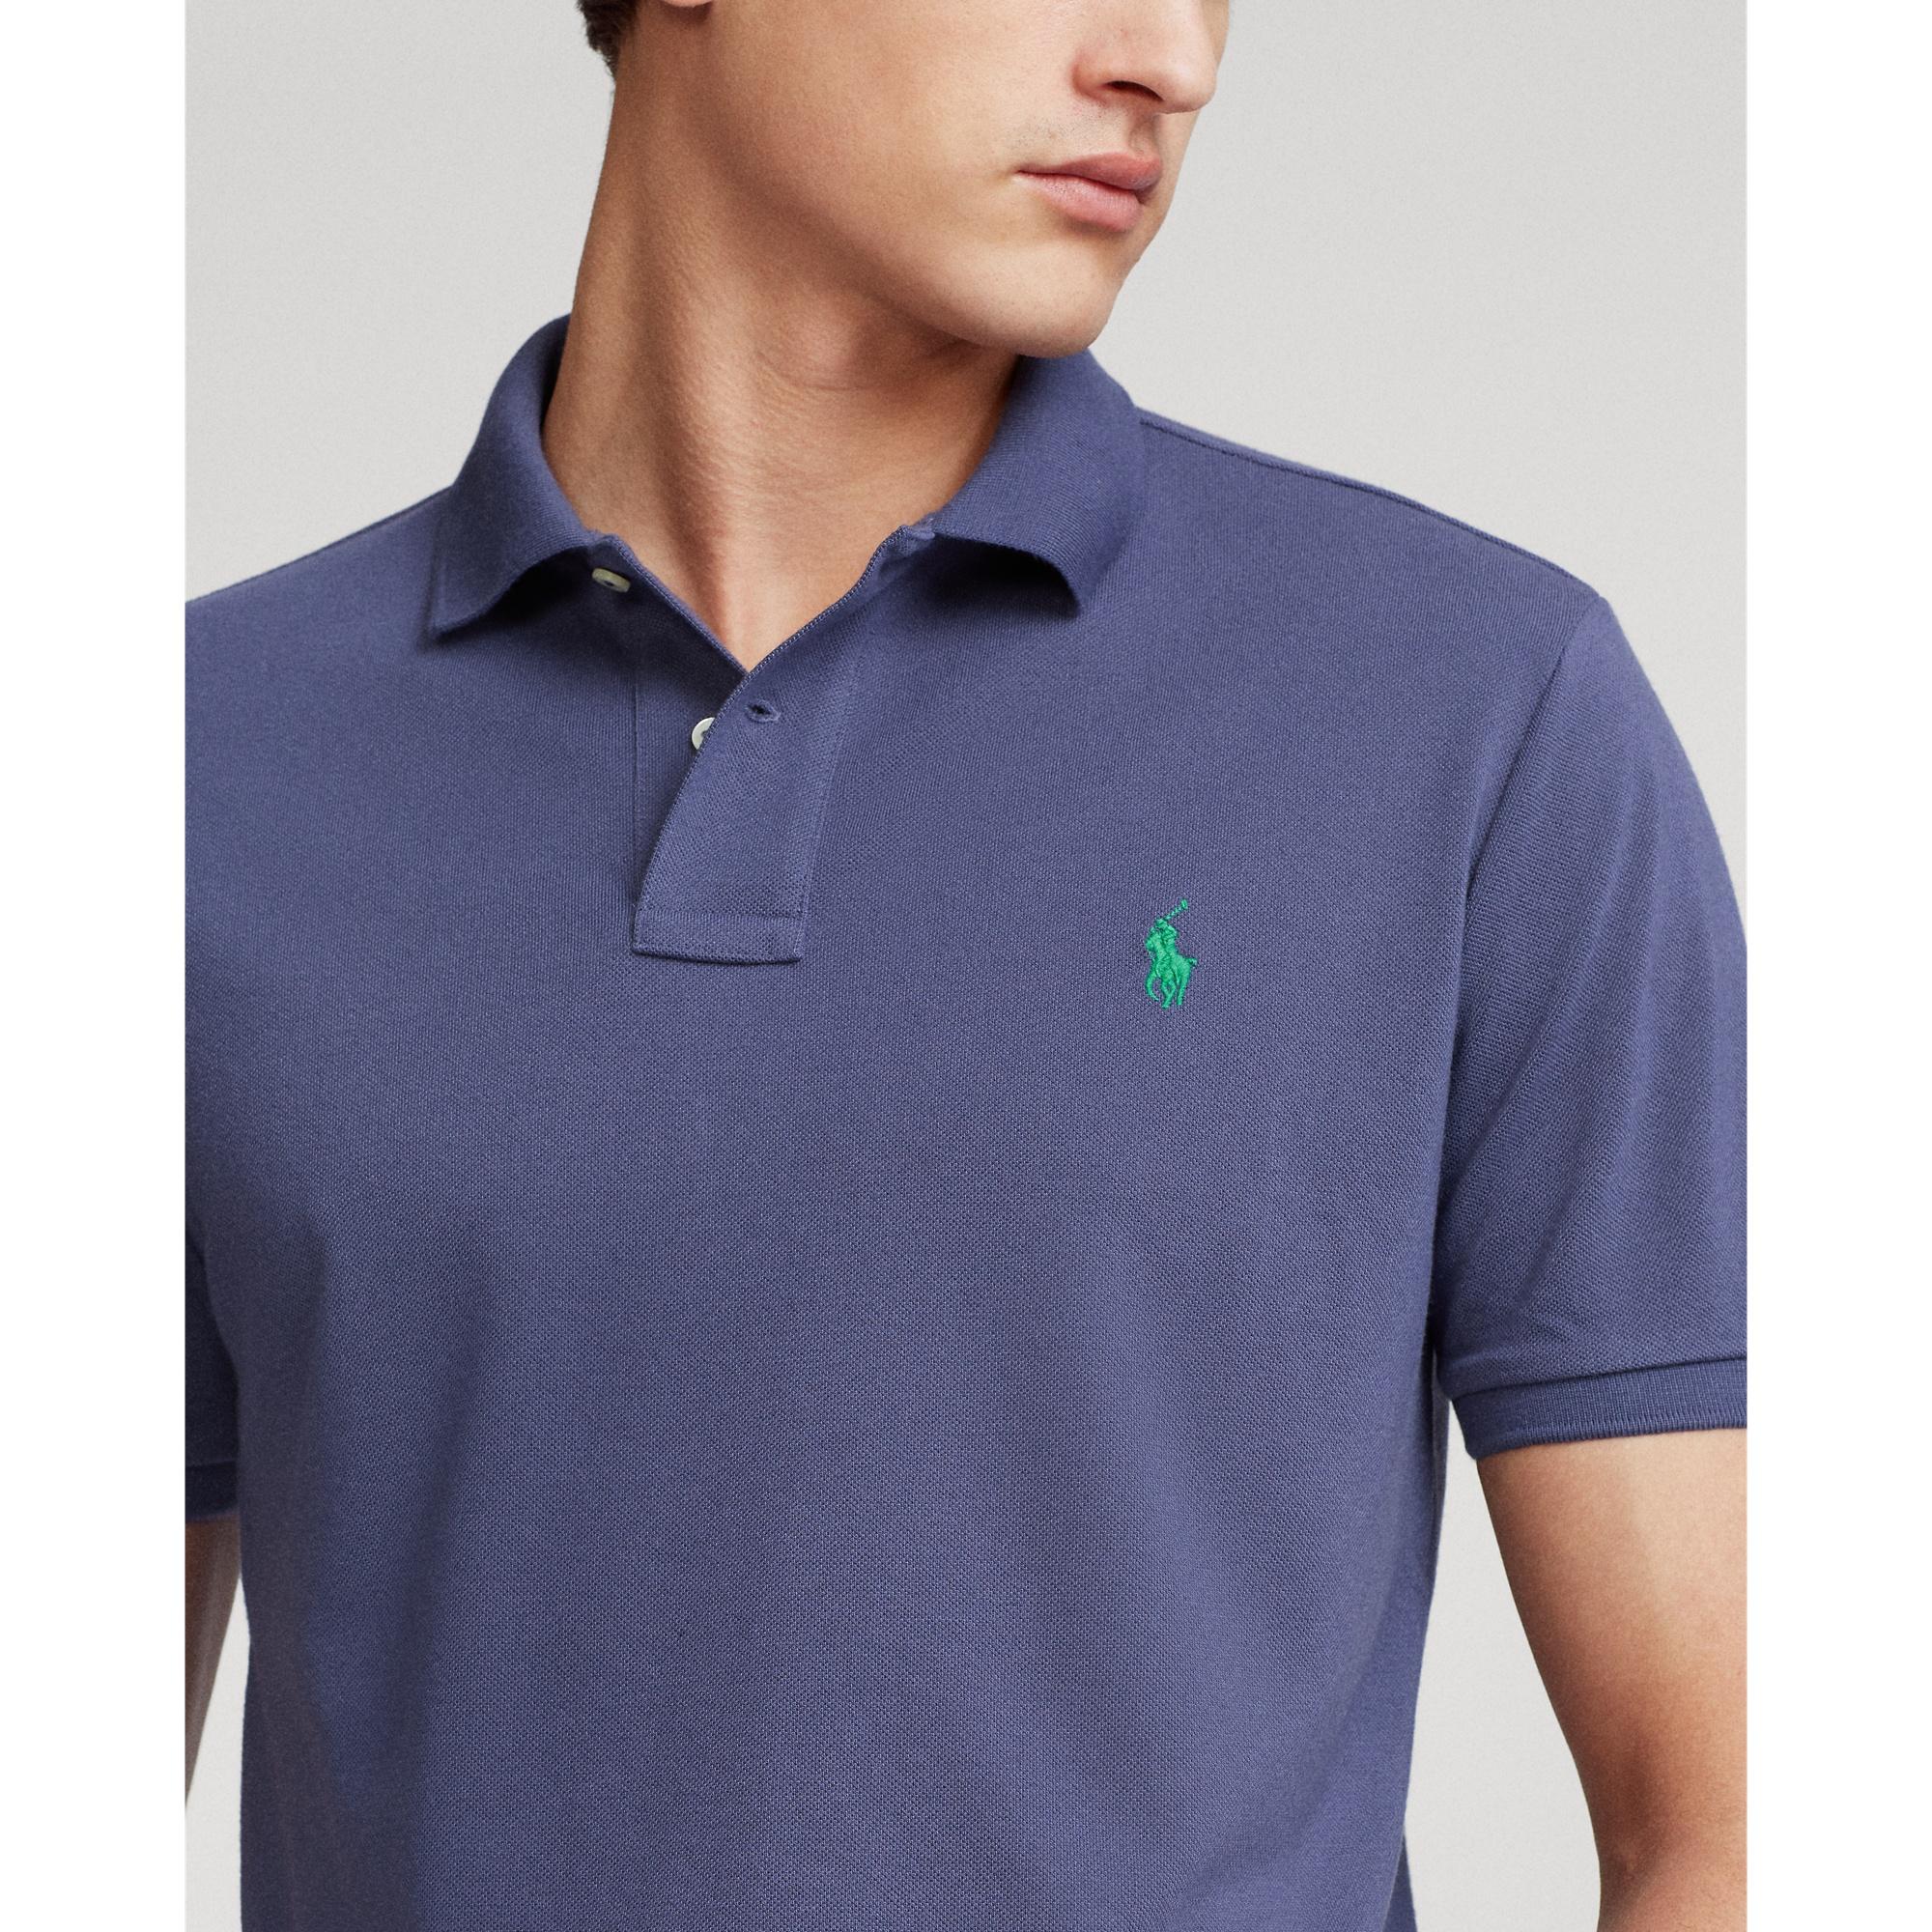 Ralph Lauren The Earth Polo in Blue for Men - Lyst